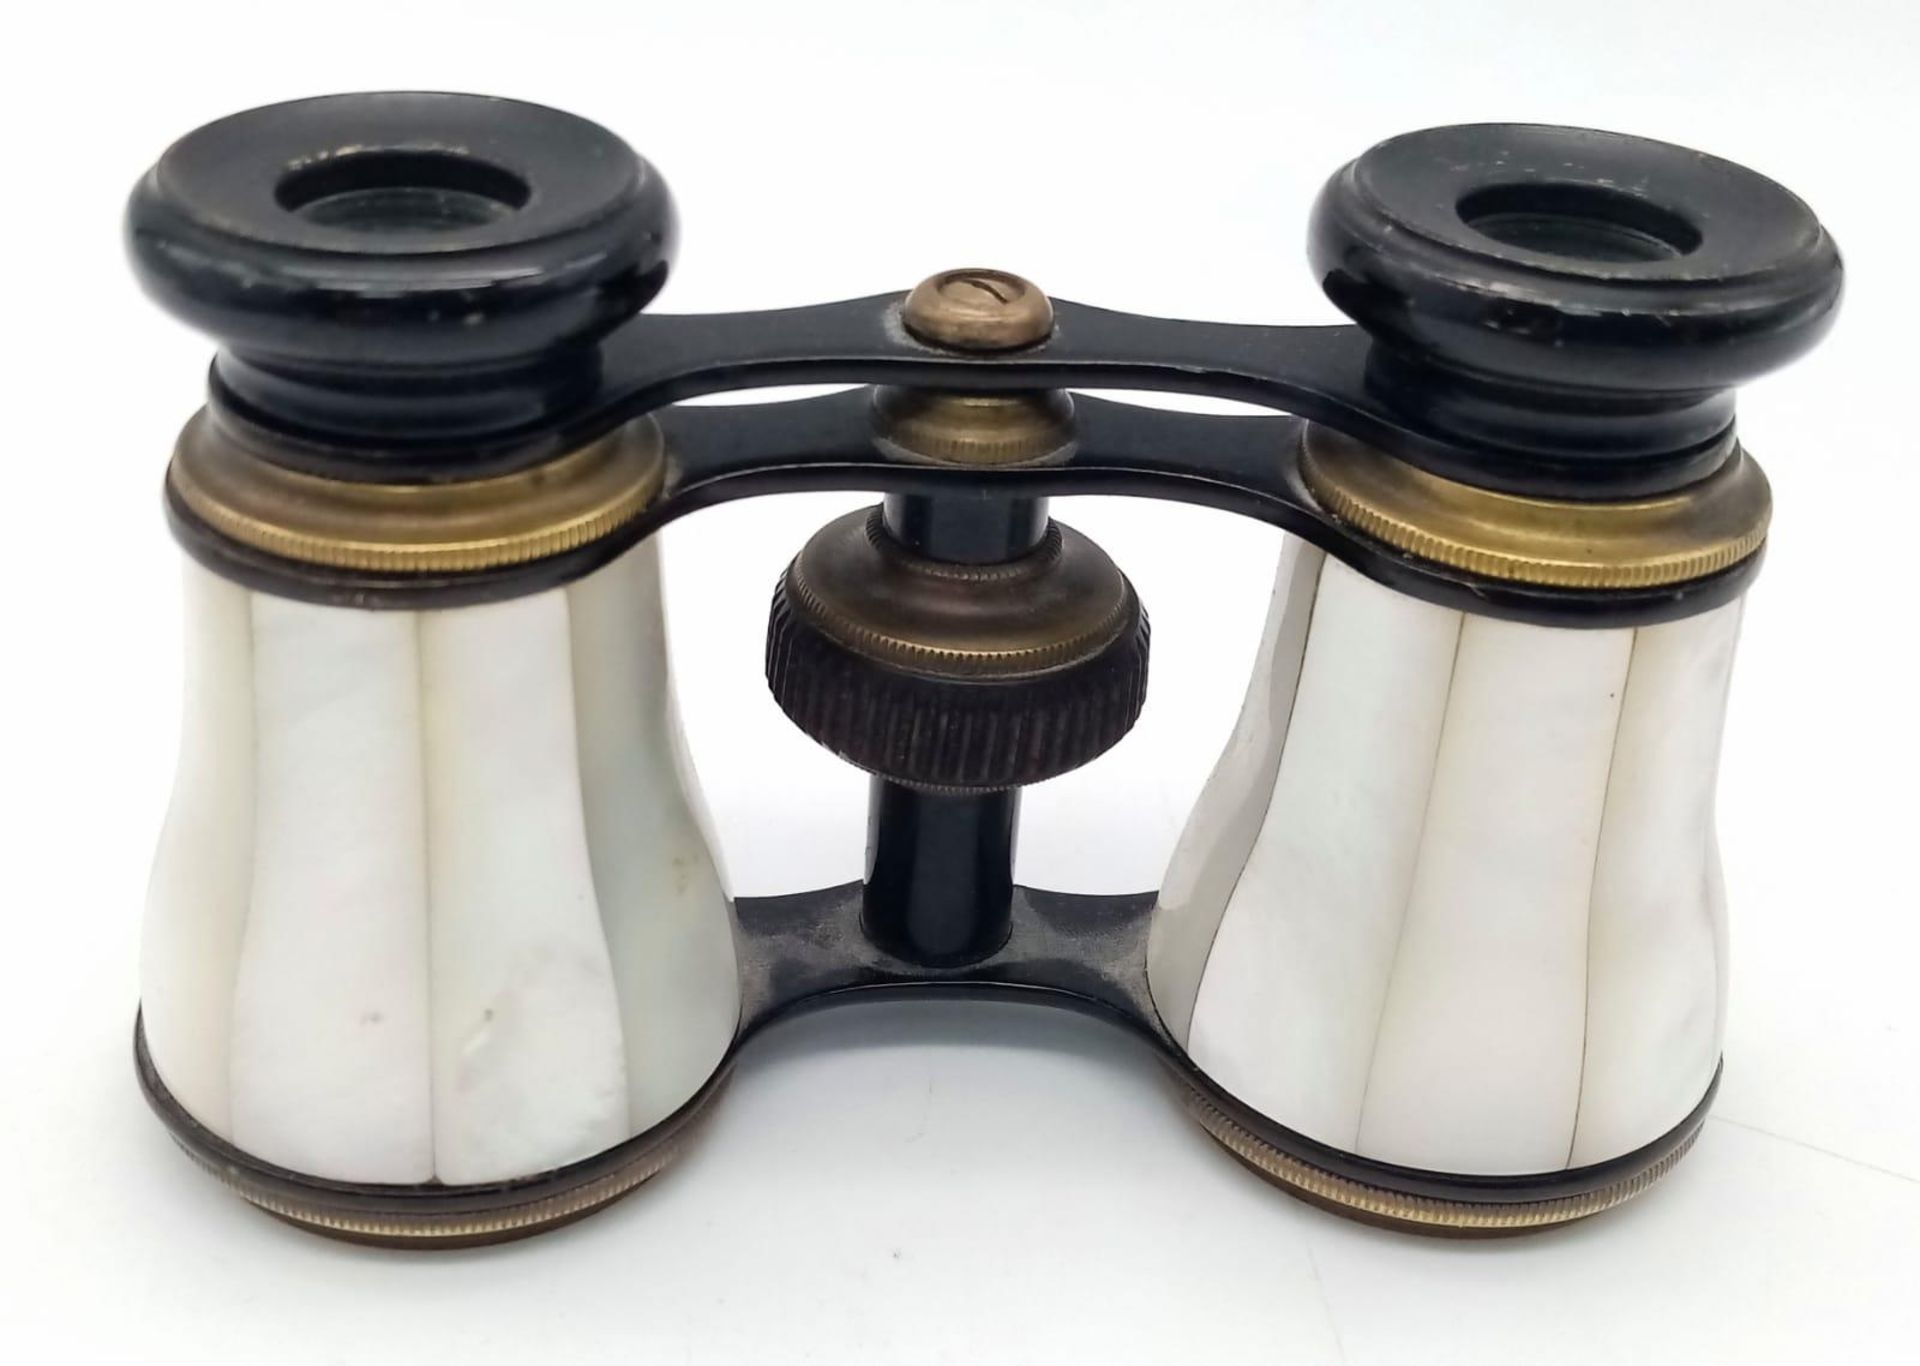 A BEAUTIFUL ANTIQUE OPERA BINOCULARS WITH MOTHER OF PEARL INLAY WORKING ORDER GREAT CONDITION - Image 2 of 4